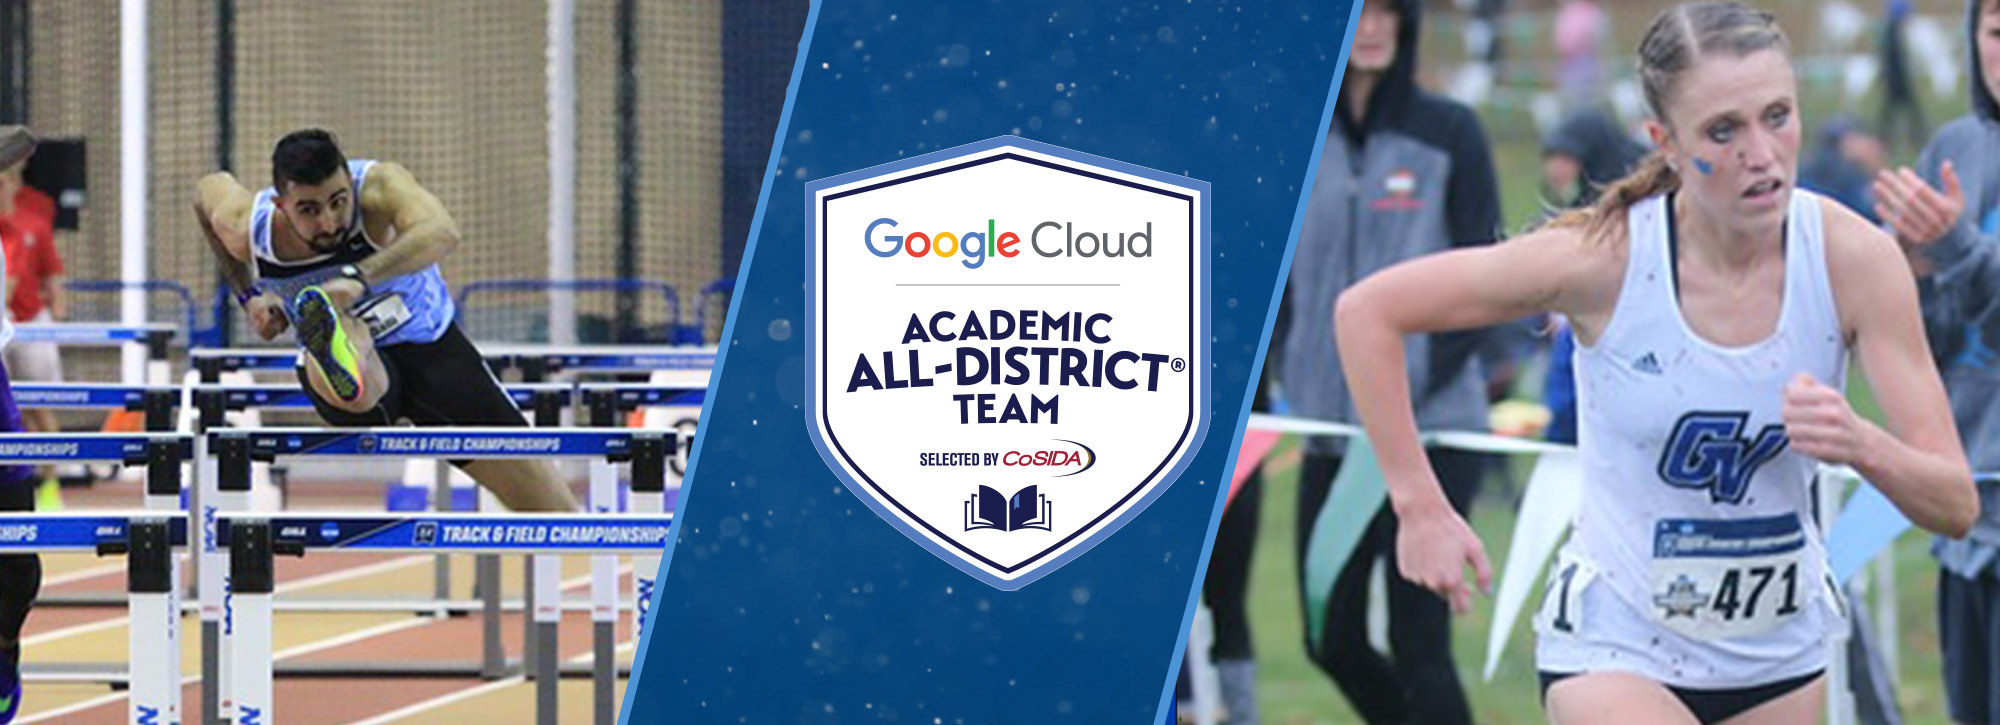 Twelve Track & Field/XC Athletes Selected to CoSIDA Google Cloud Academic All-District Team